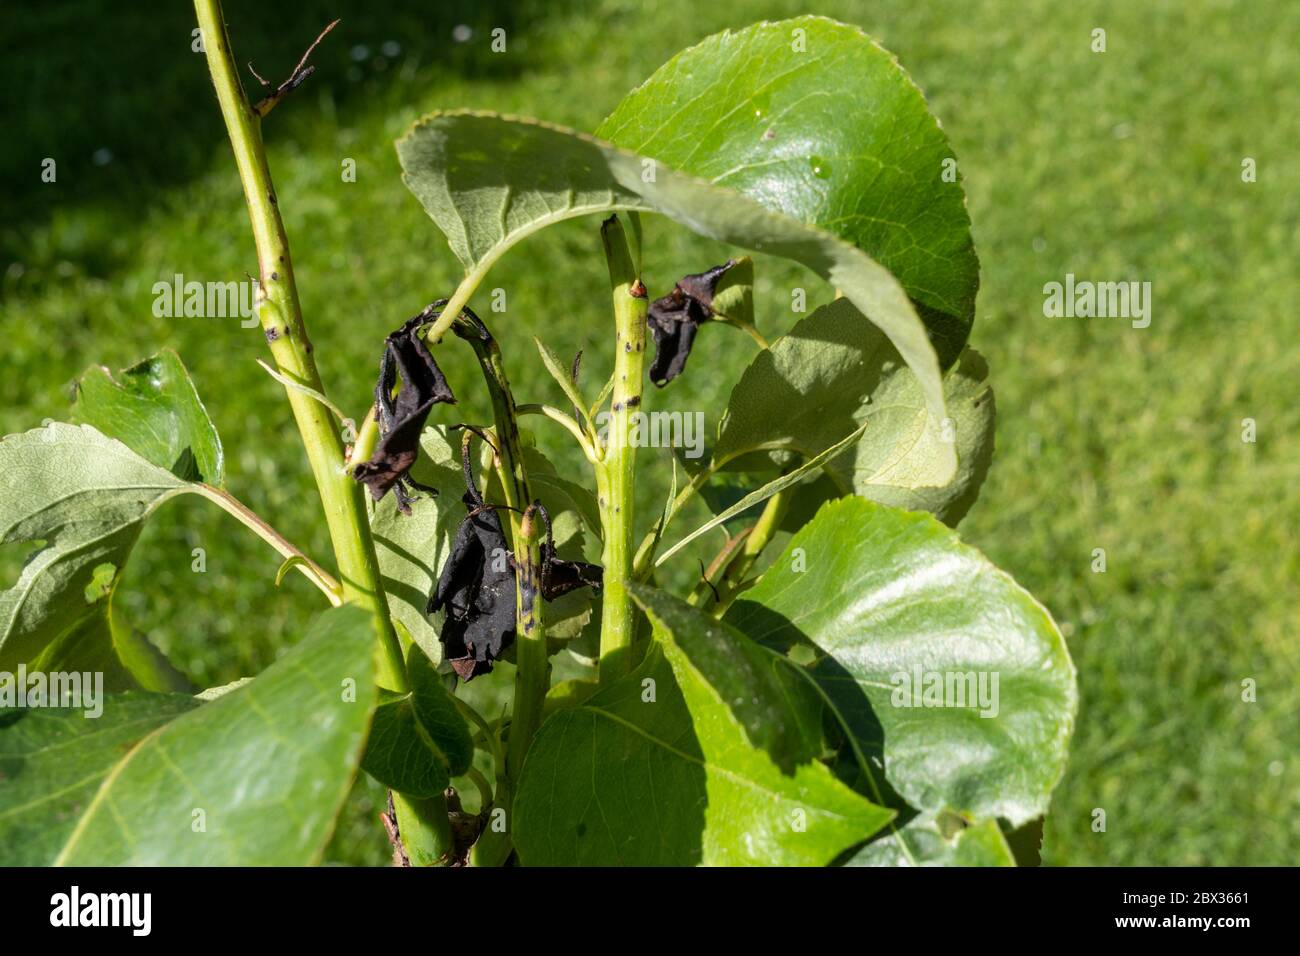 Fire blight disease affected pear leaves. Stock Photo